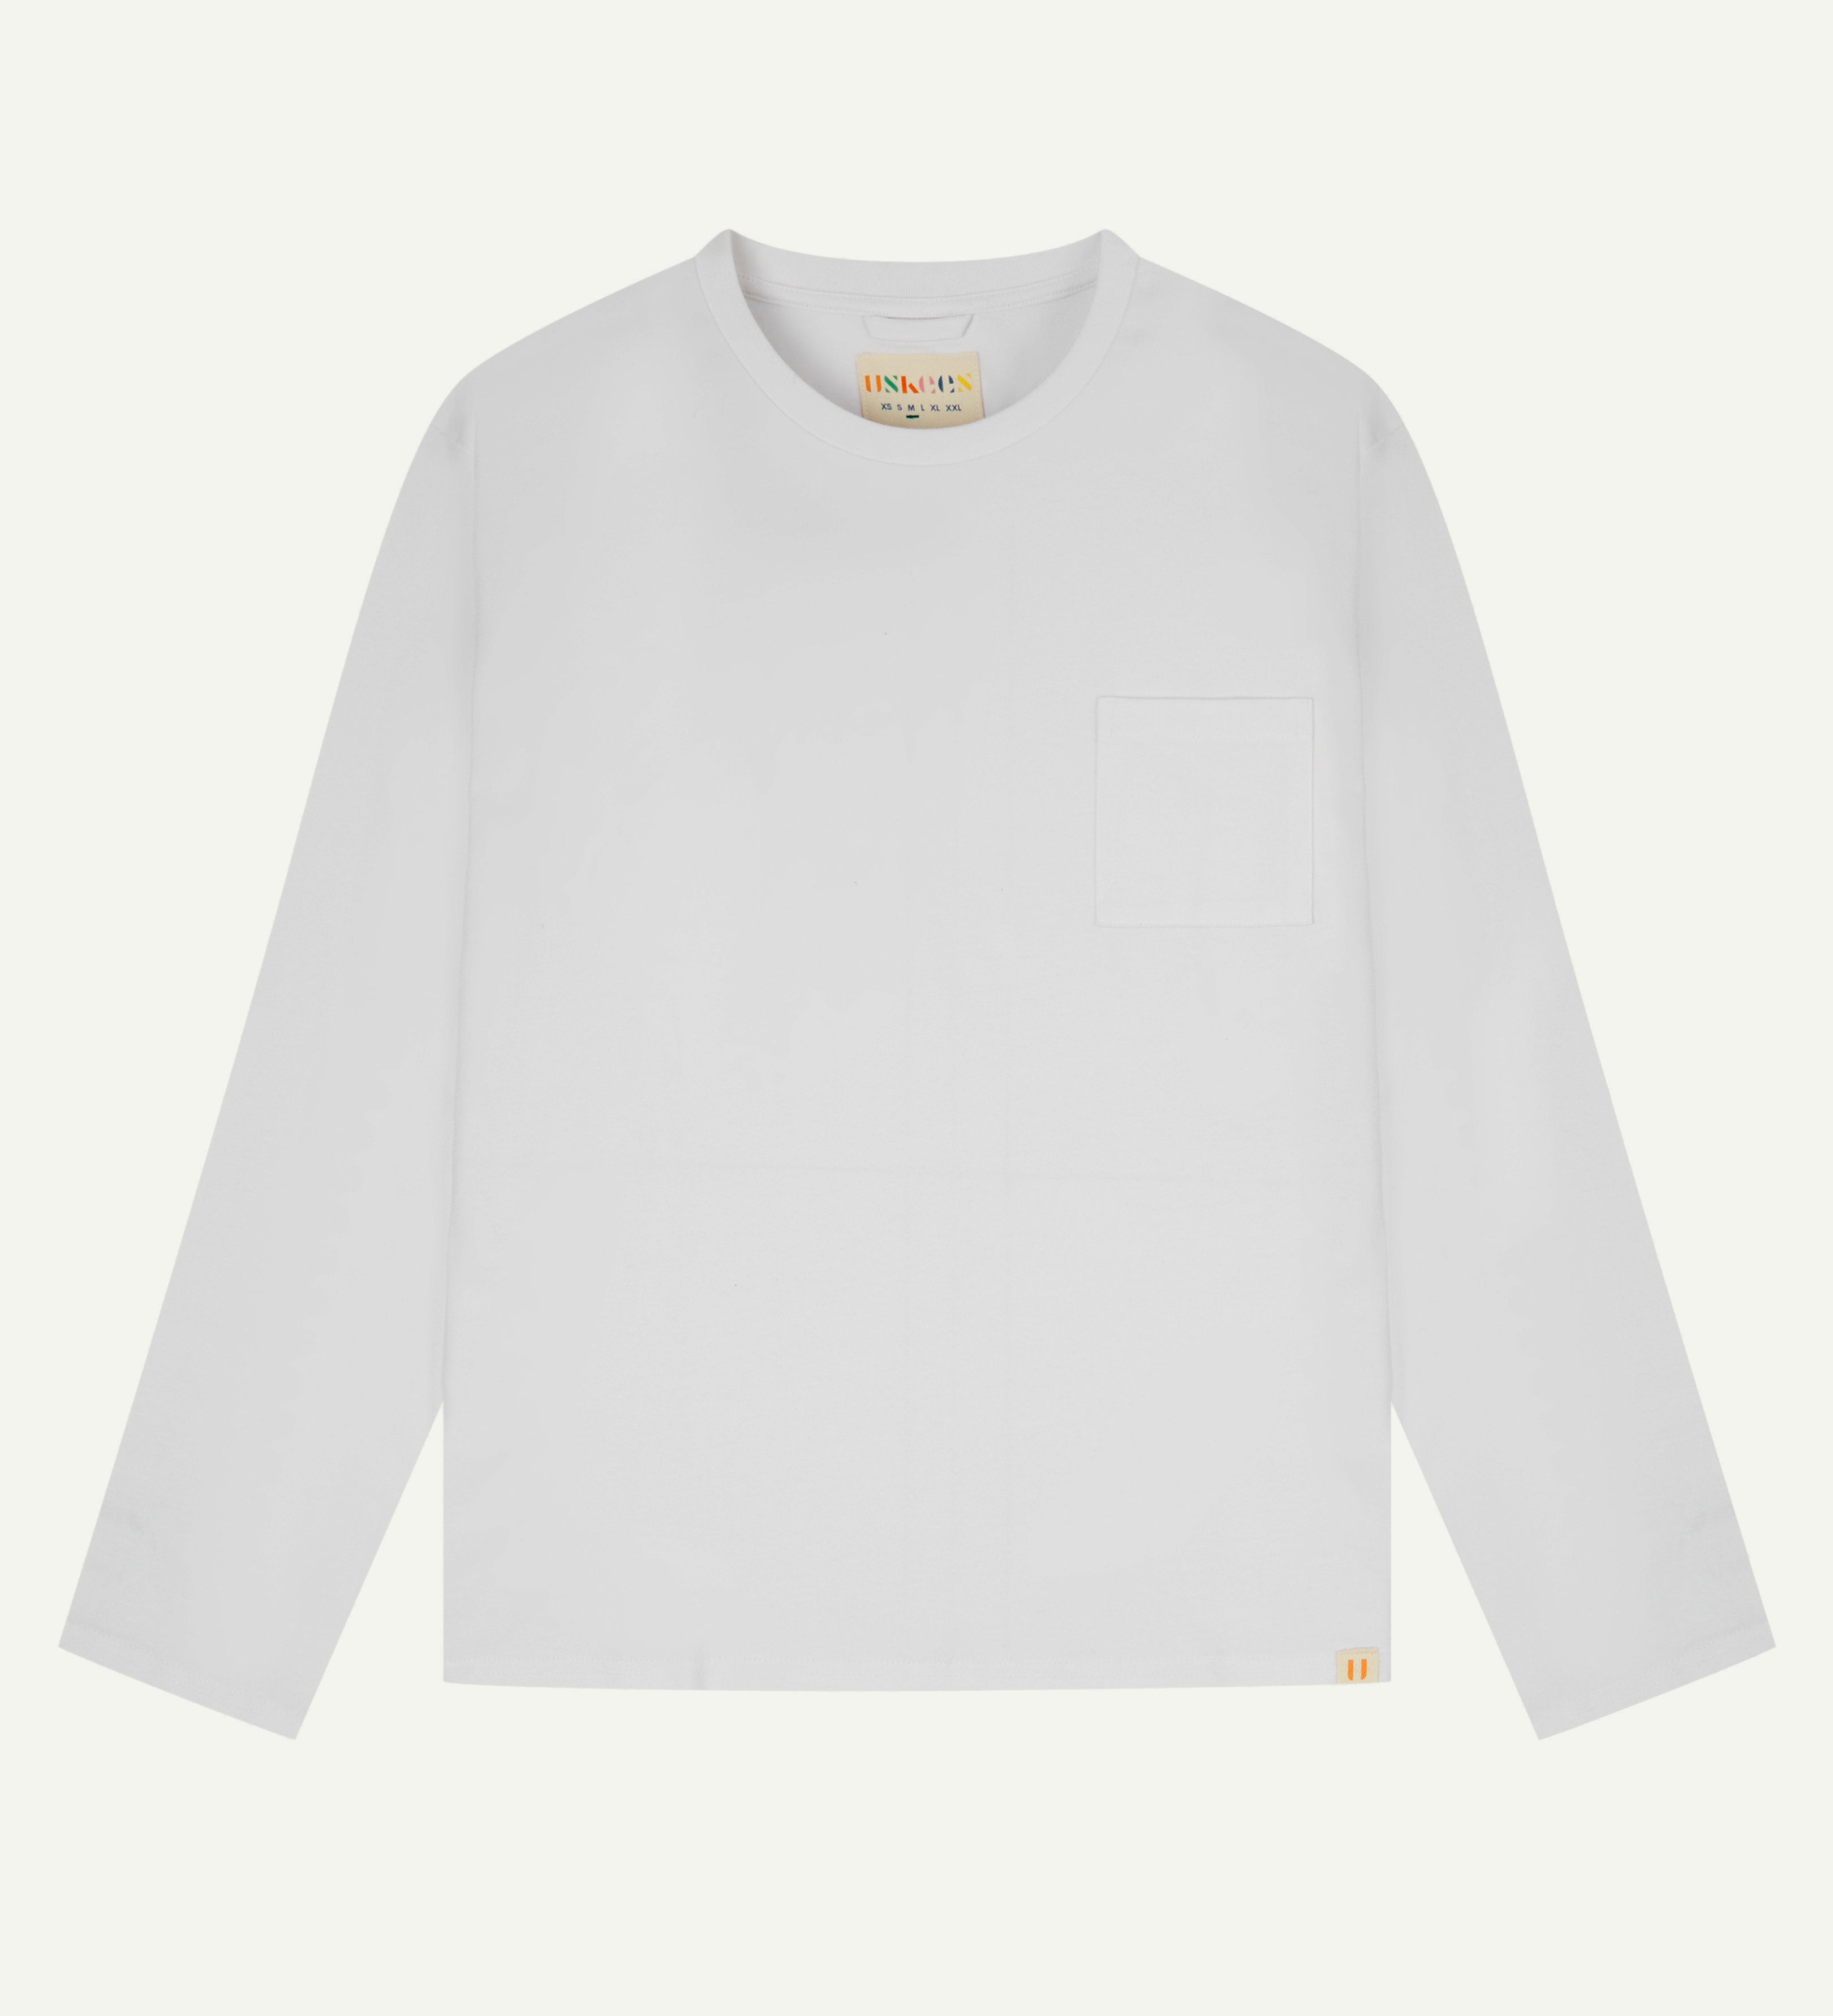 Front flat shot of white cotton uskees long sleeved T-shirt for men.